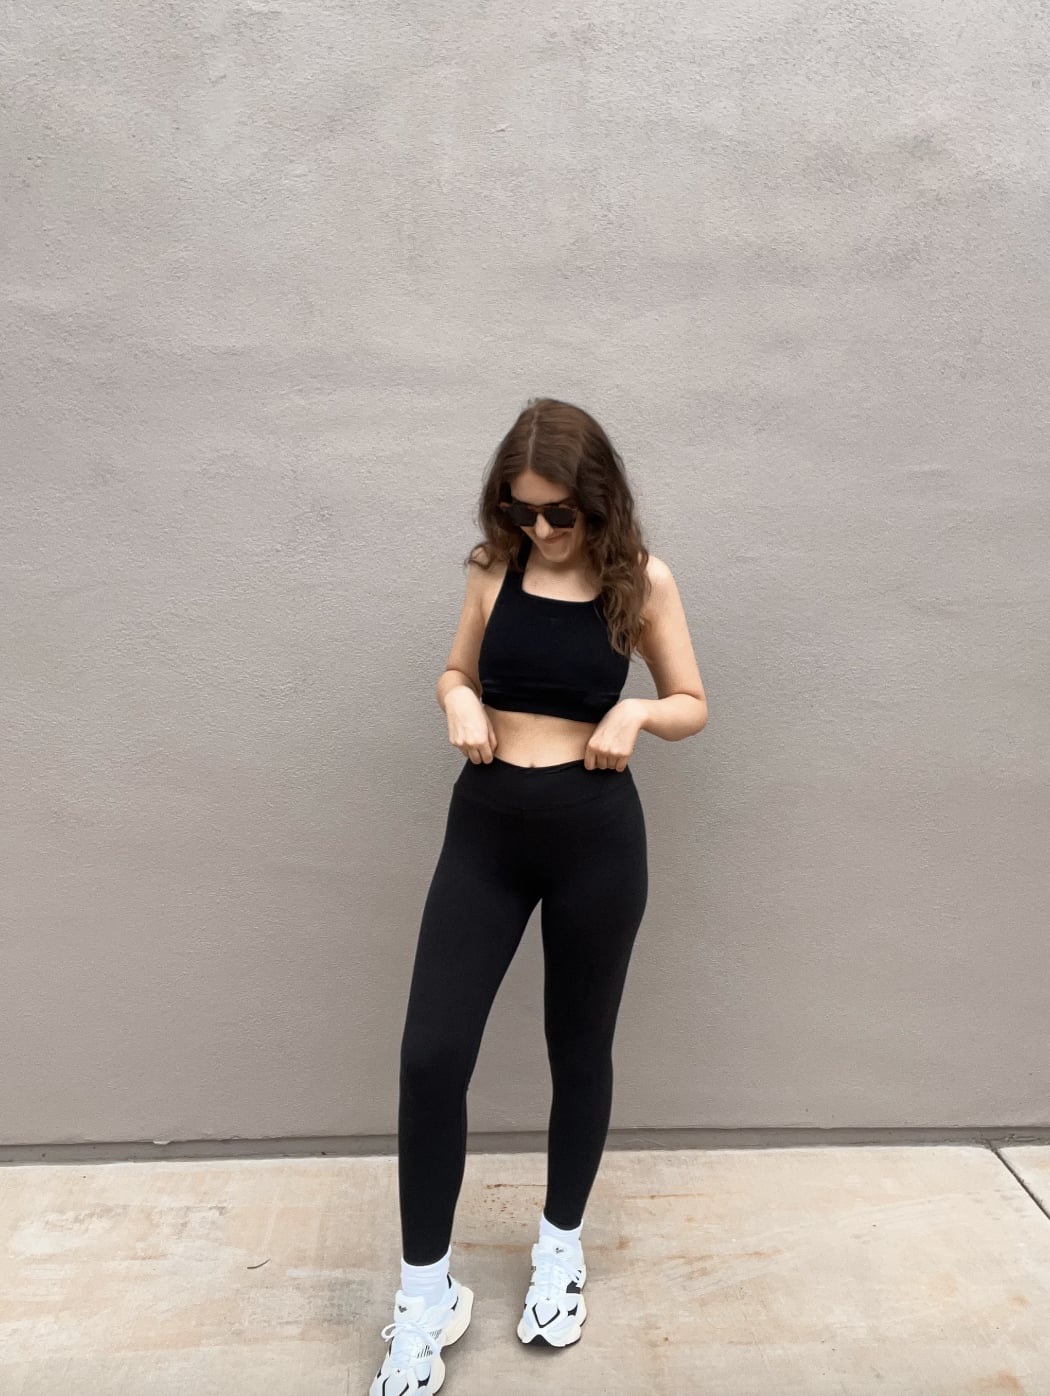 How to Turn Leggings into Crop Top